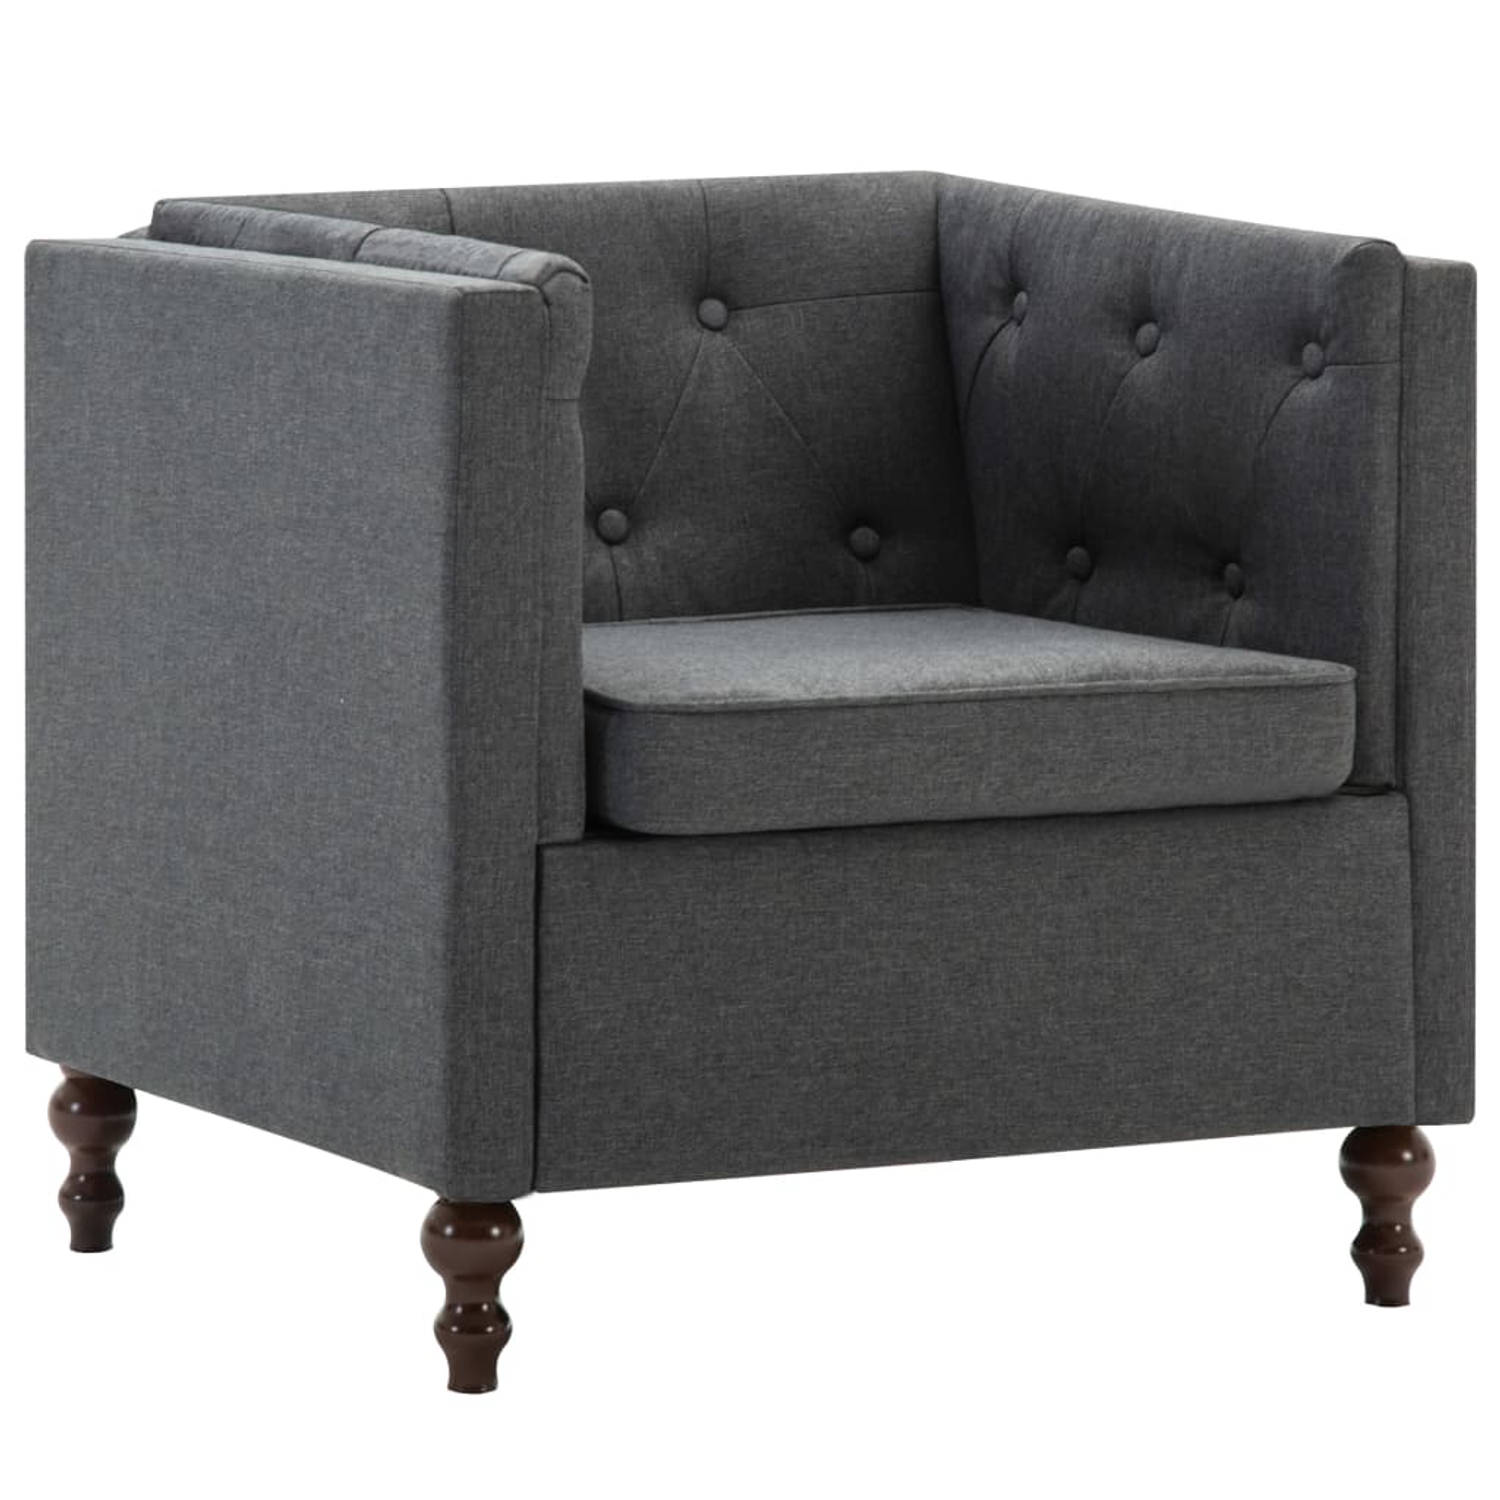 The Living Store Chesterfield Fauteuil Donkergrijs 72 x 68 x 70 cm Houten Frame Polyester